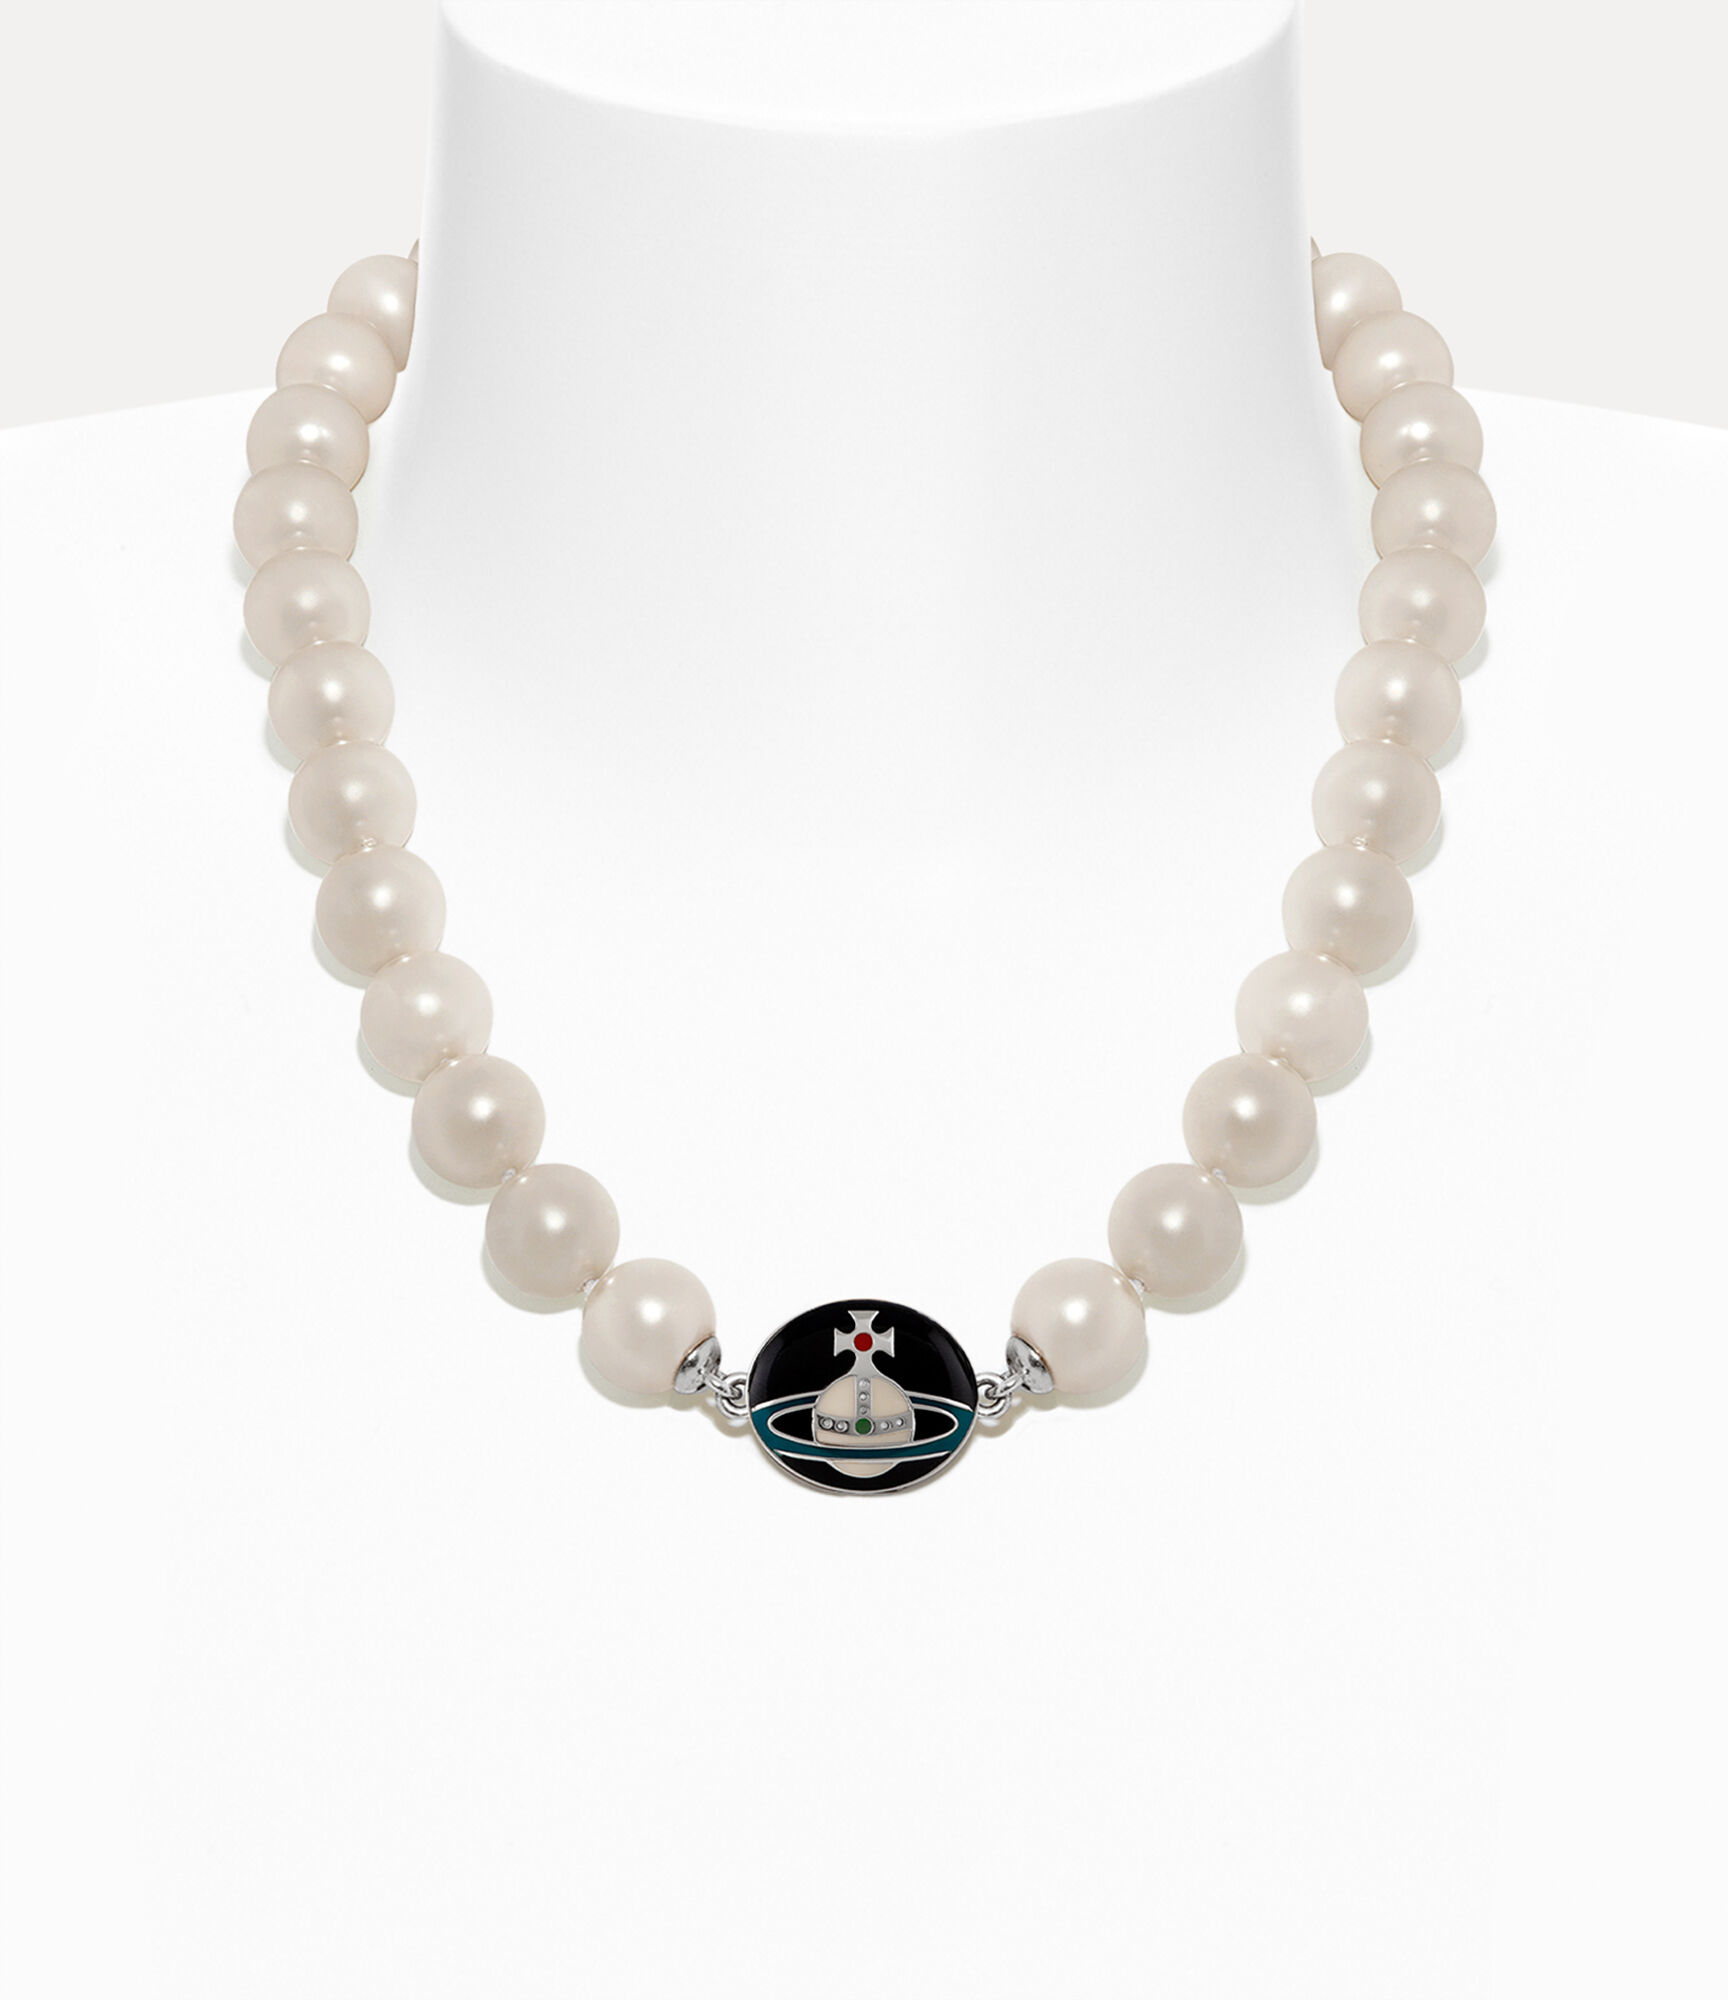 LARGE PEARL AND CRYSTAL PENDANT NECKLACE - Calisa Designs